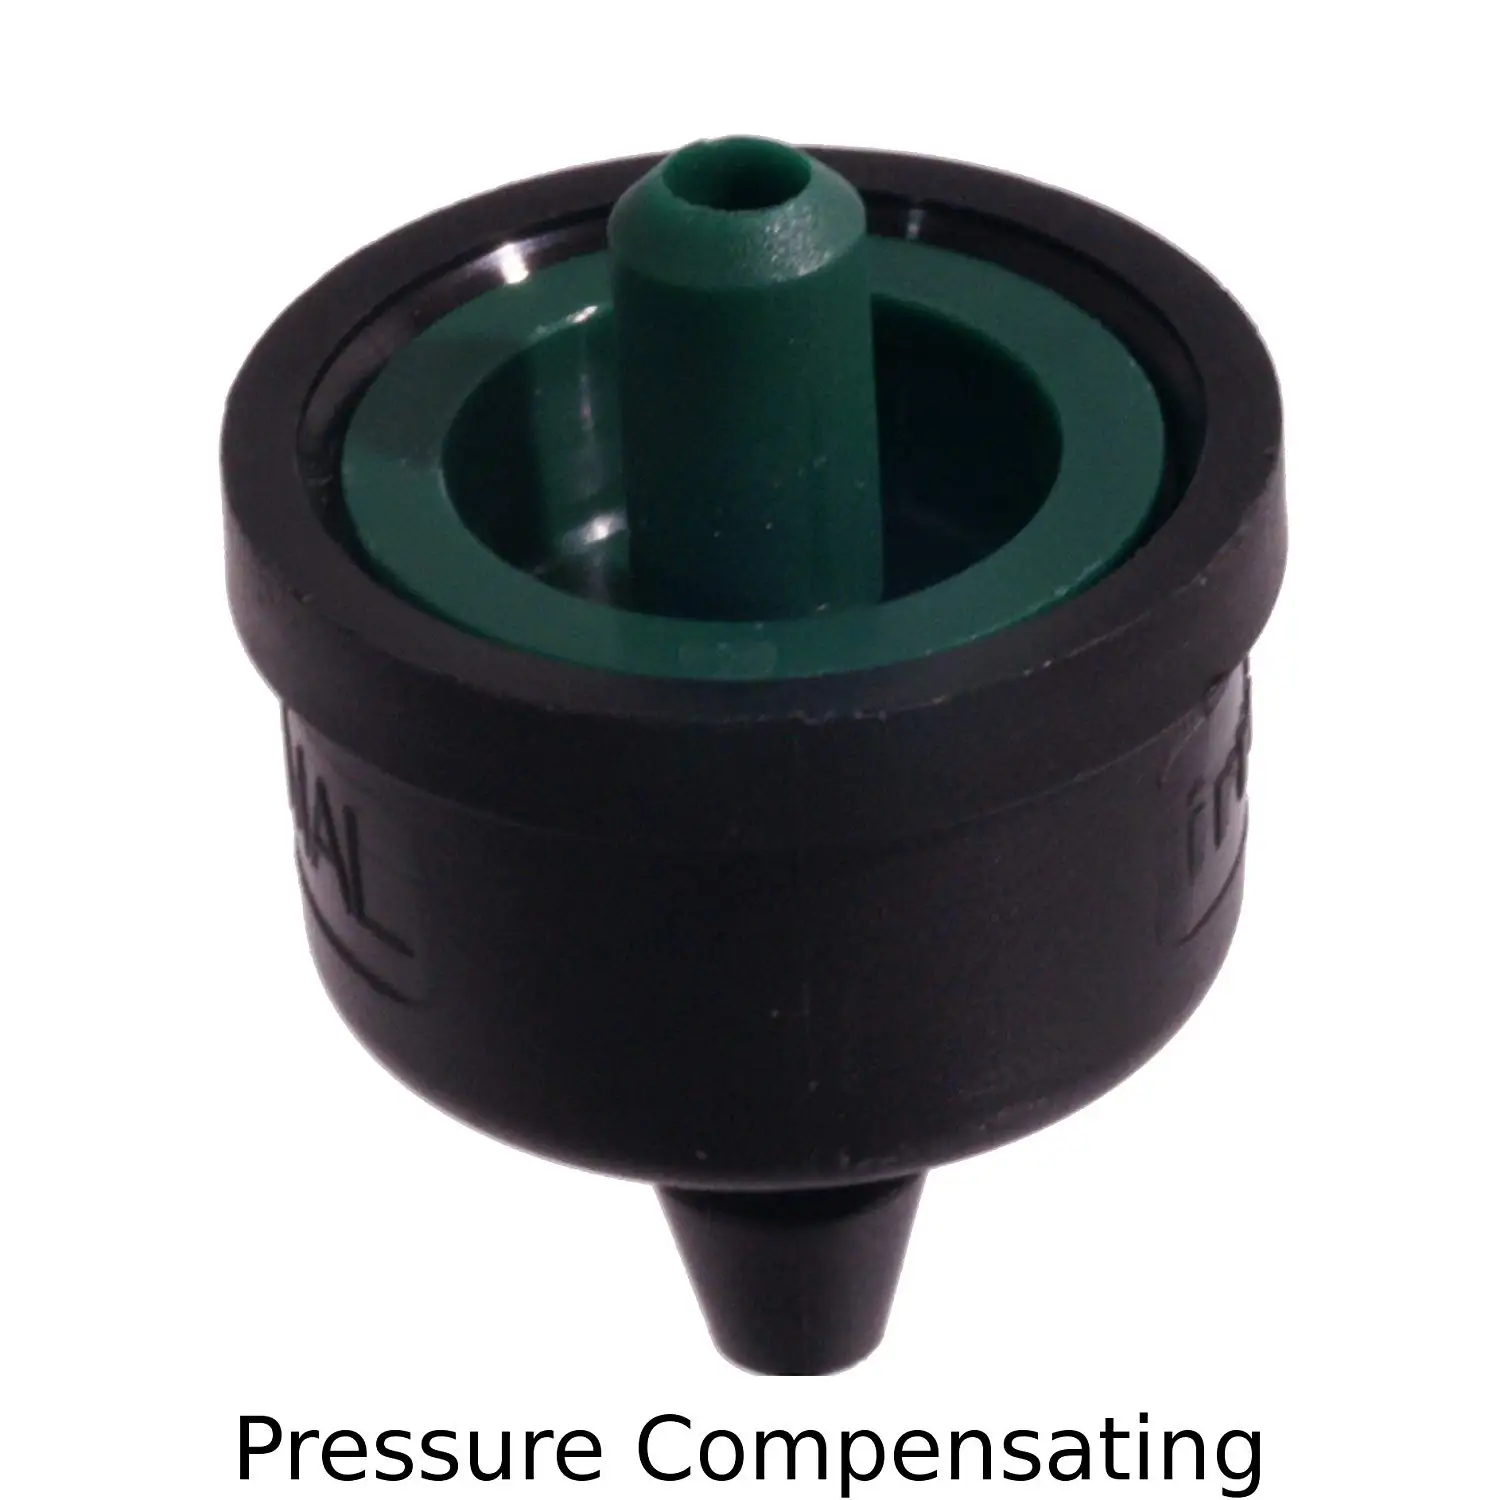 Antelco Ceta Cleanable Pressure Compensating Dripper-Flow Rate:2.0 GPH-100 pack